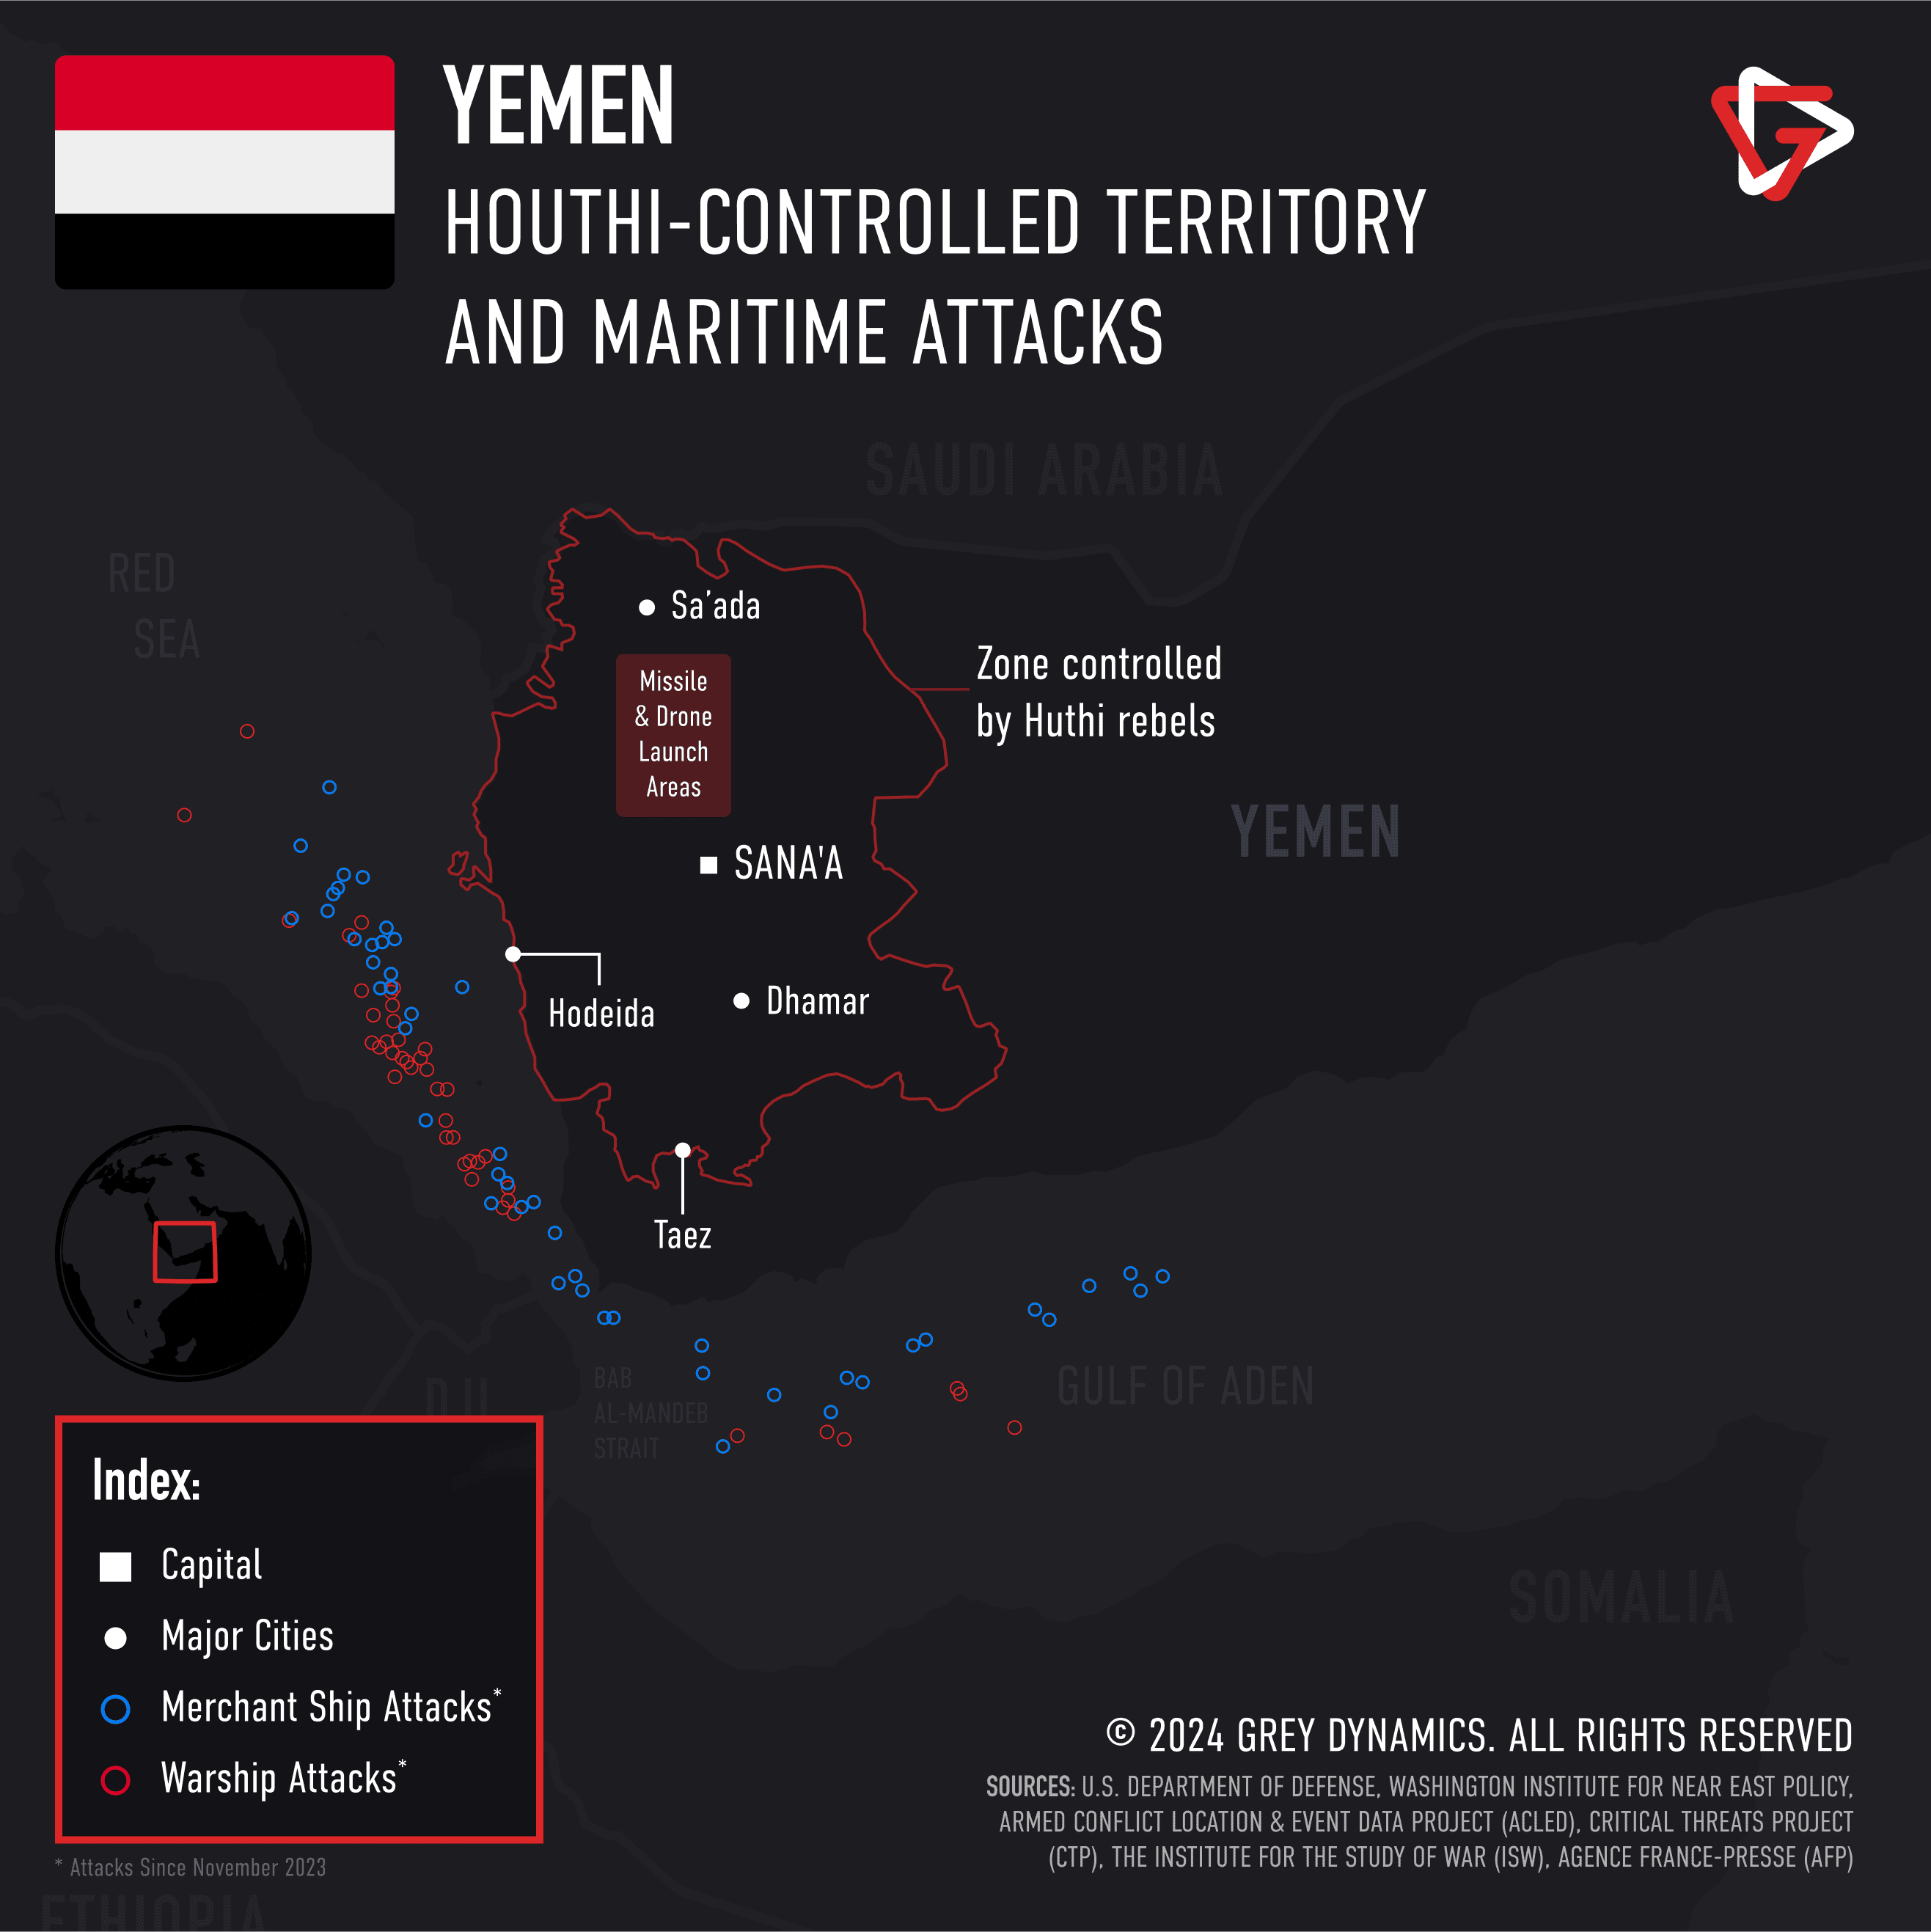 Houthi-controlled (Ansar Allah) territory and the Organisation's attacks on merchant ships and warships in the Red Sea and Gulf of Aden since November 2023.